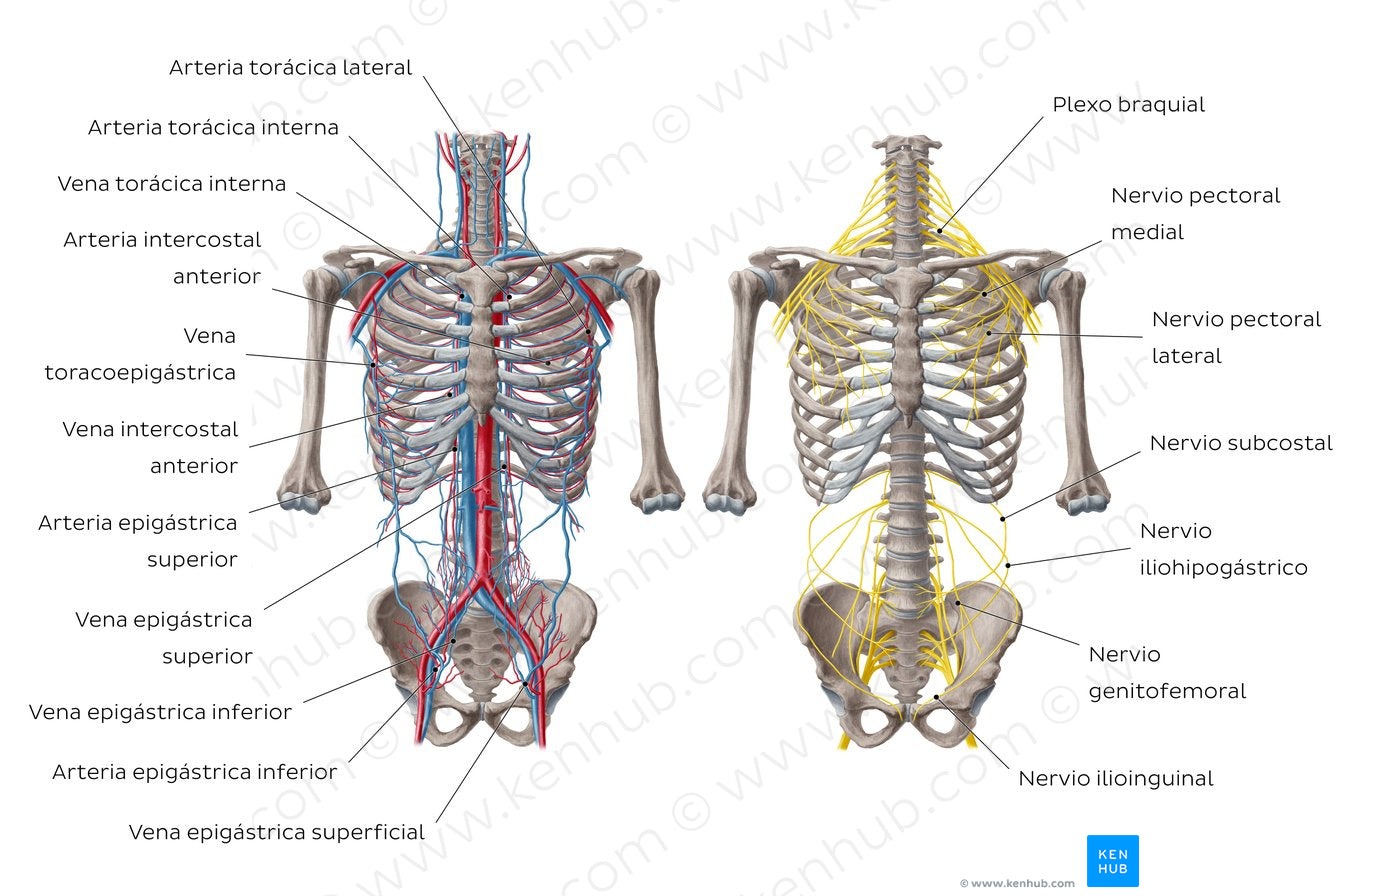 Nerves and vessels of the anterior thoracic wall (Spanish)